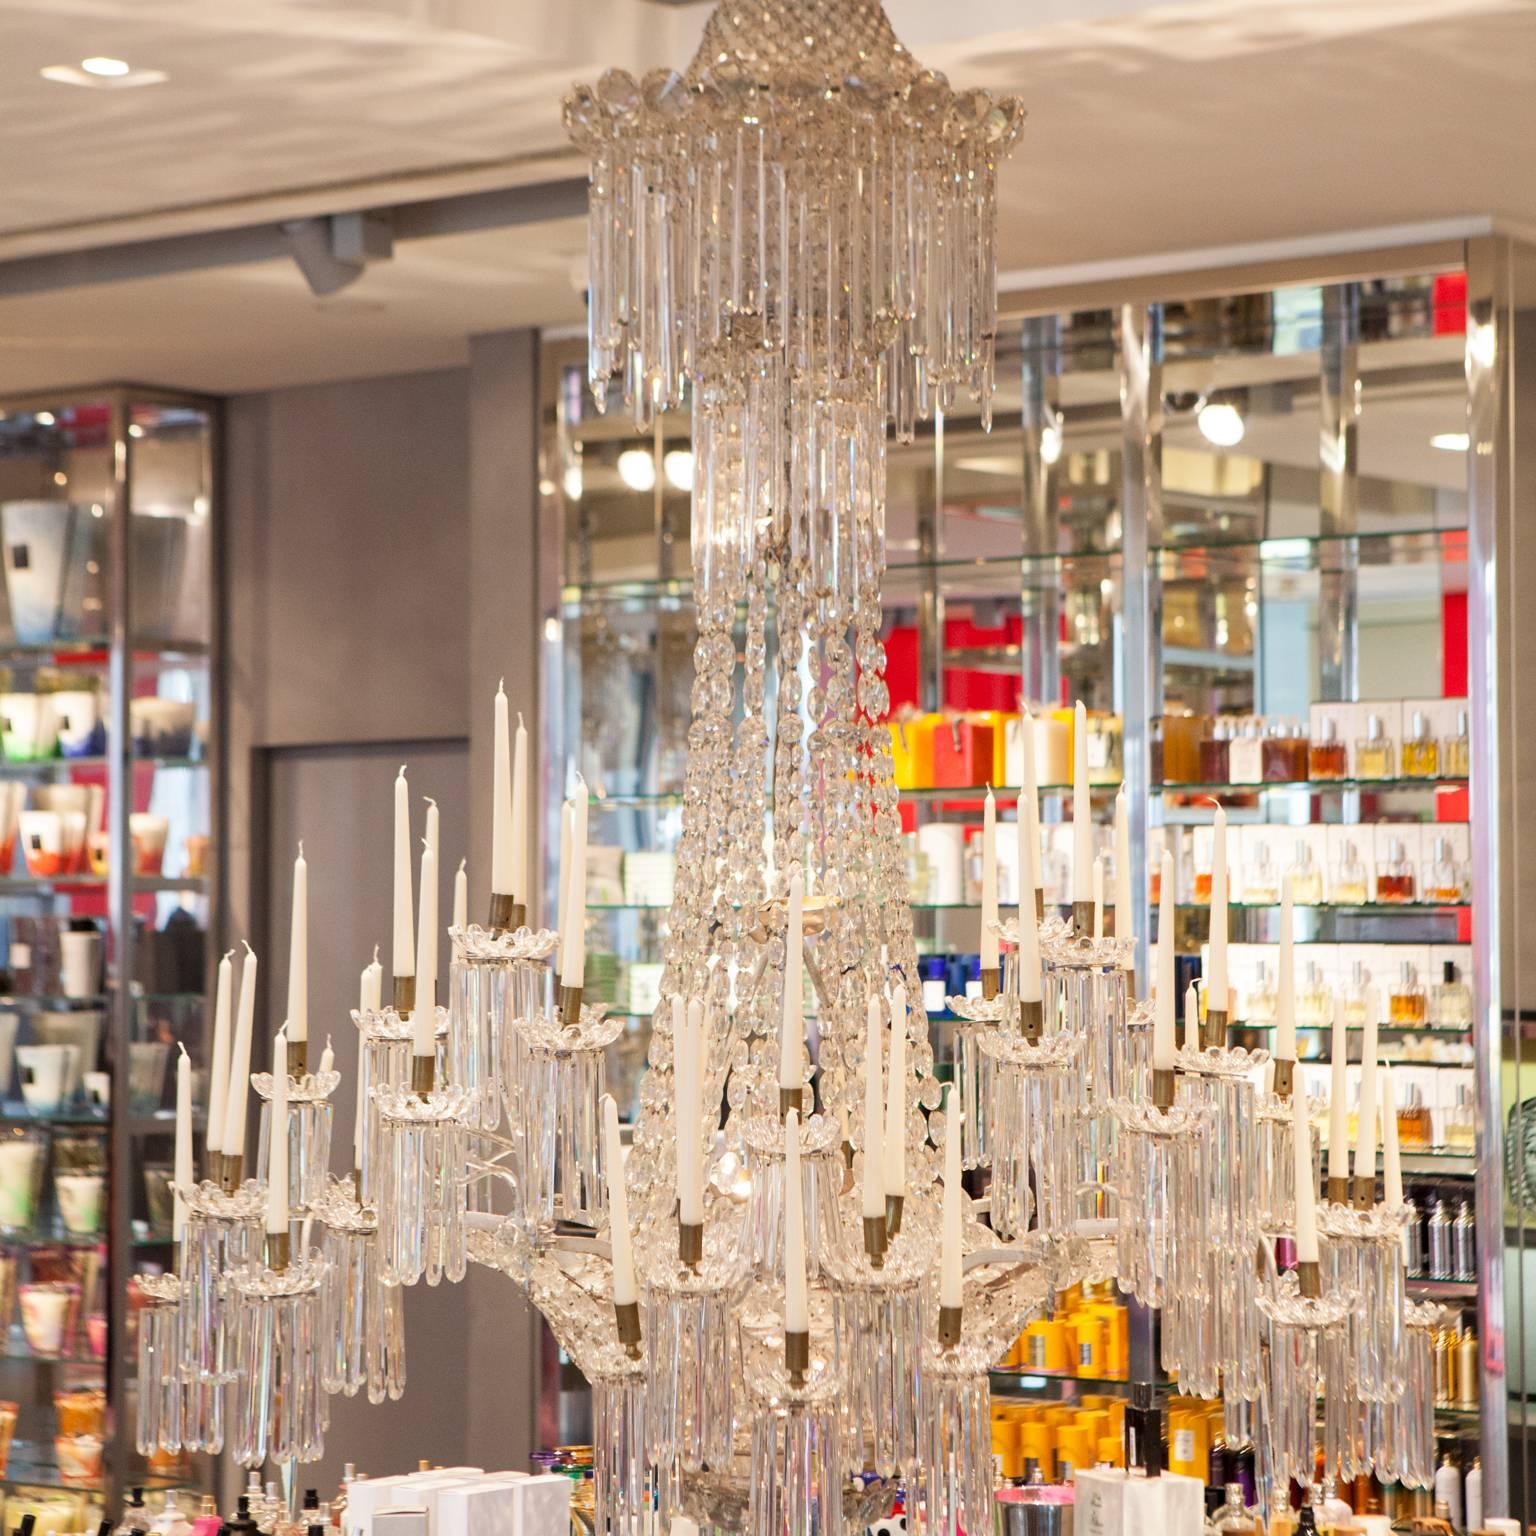 You are looking for something unique, something no one else has ? Then we’ve got a truly stunning rarity for you.
The huge chandelier wows with its size – hundreds of fine baccarat crystals capture the light and create a gorgeous glow. It is